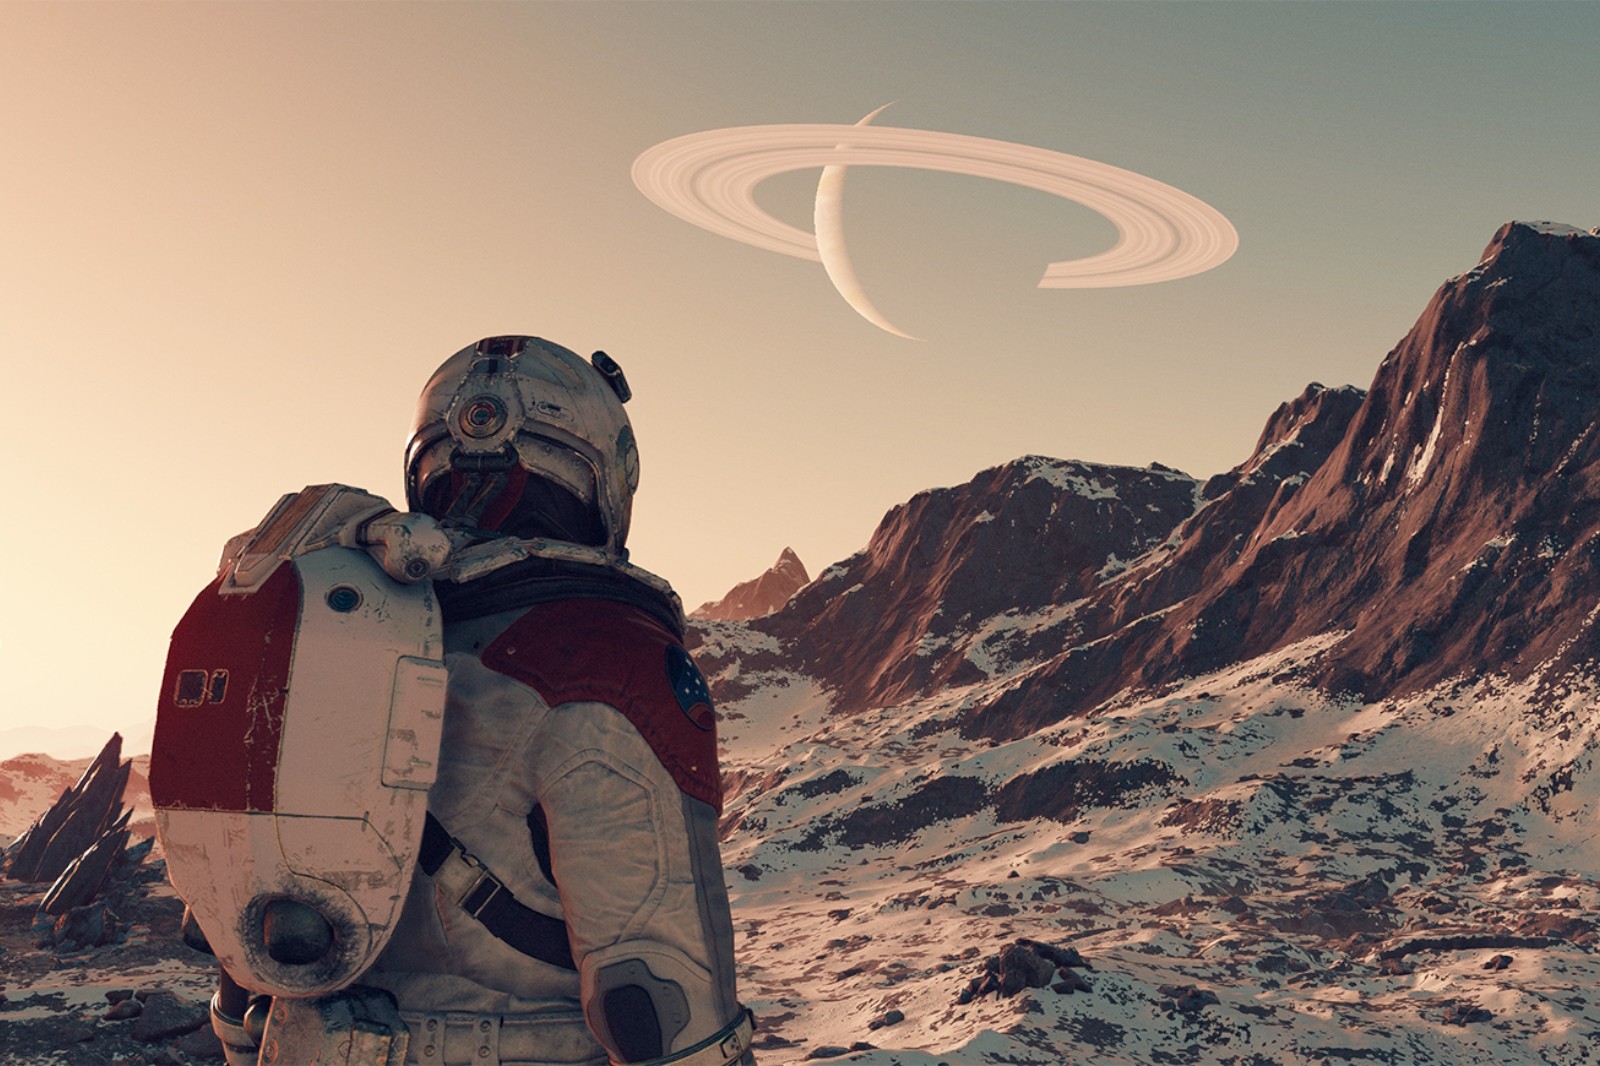 An astronaut looking over a snowy landscape, with a ringed planet in the sky